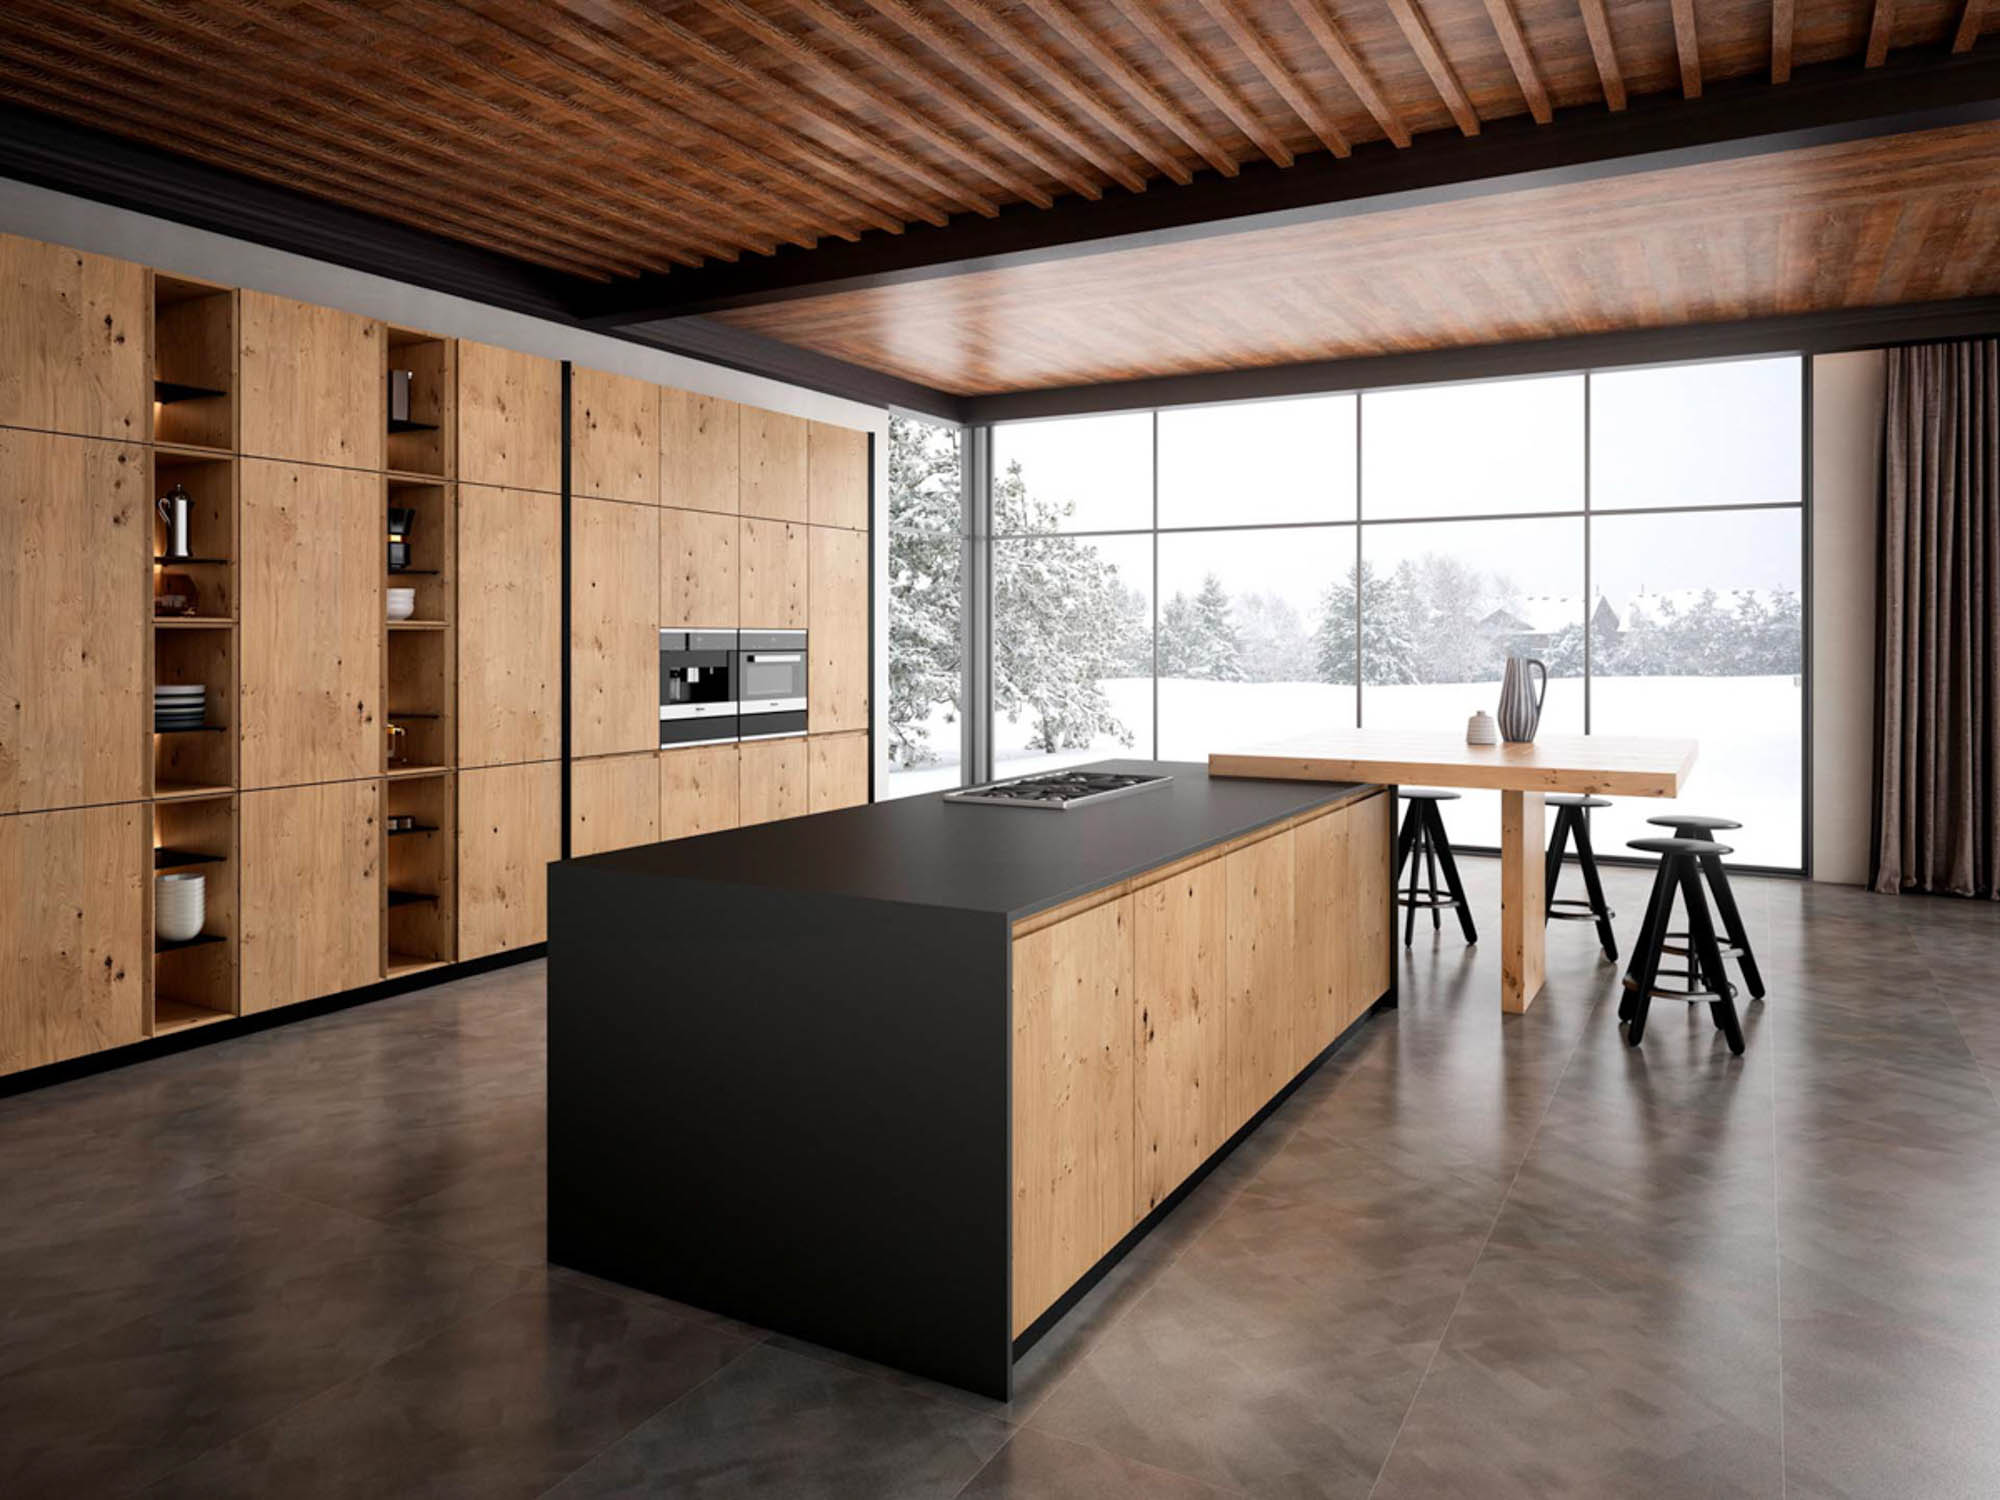 Minimalist Kitchens. In Search of Simplicity